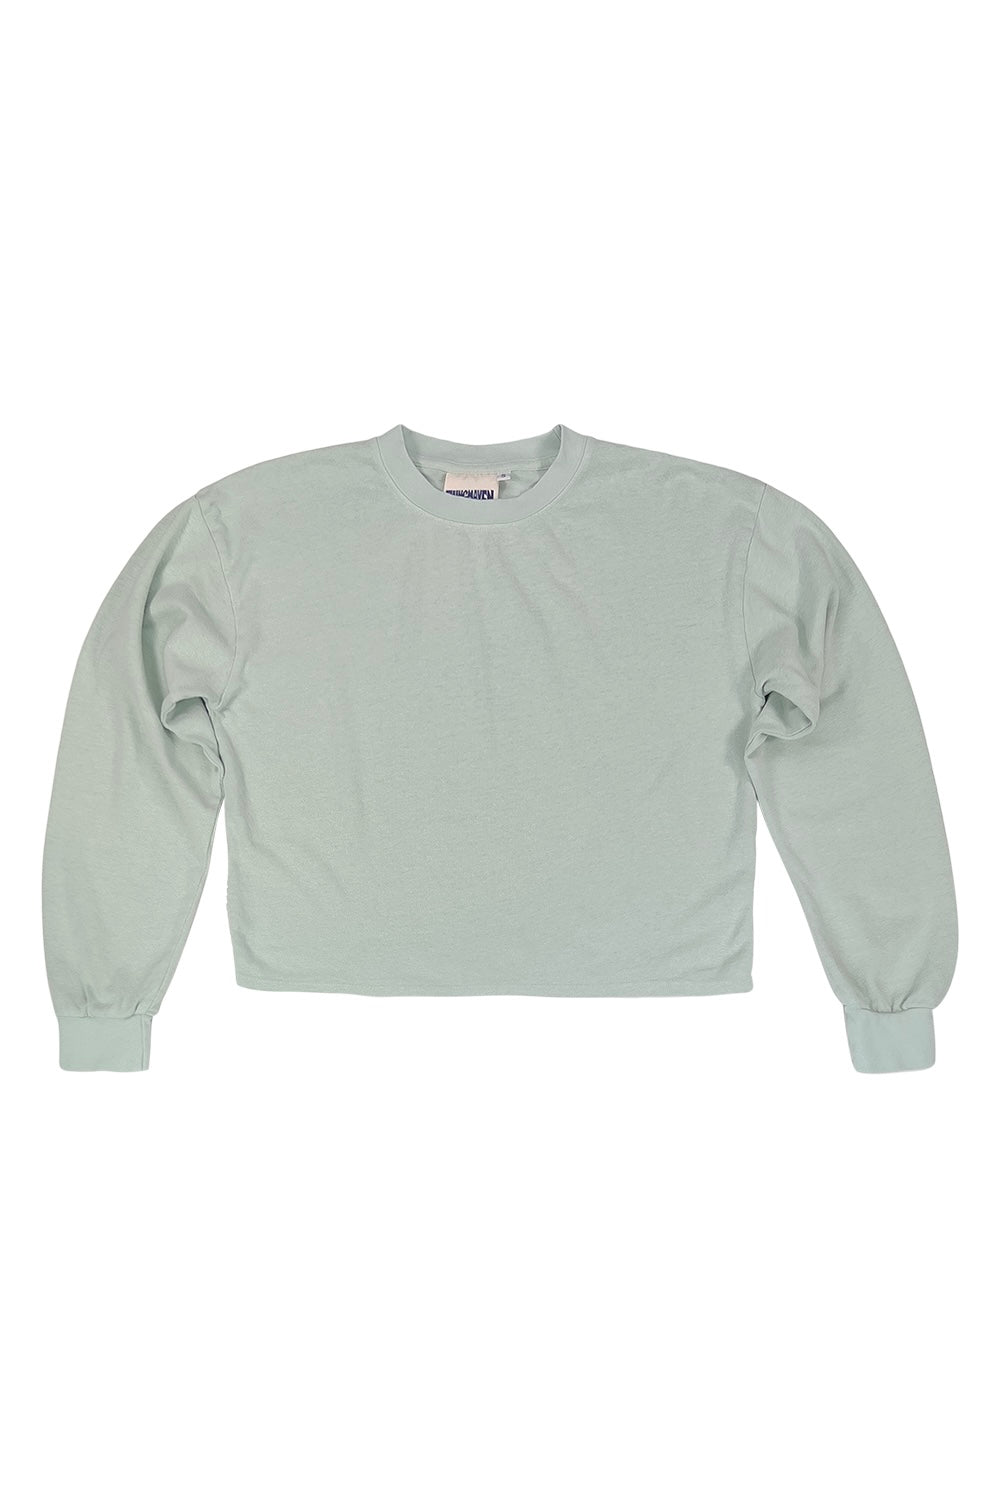 Cropped Long Sleeve Tee | Jungmaven Hemp Clothing & Accessories / Color: Seafoam Green